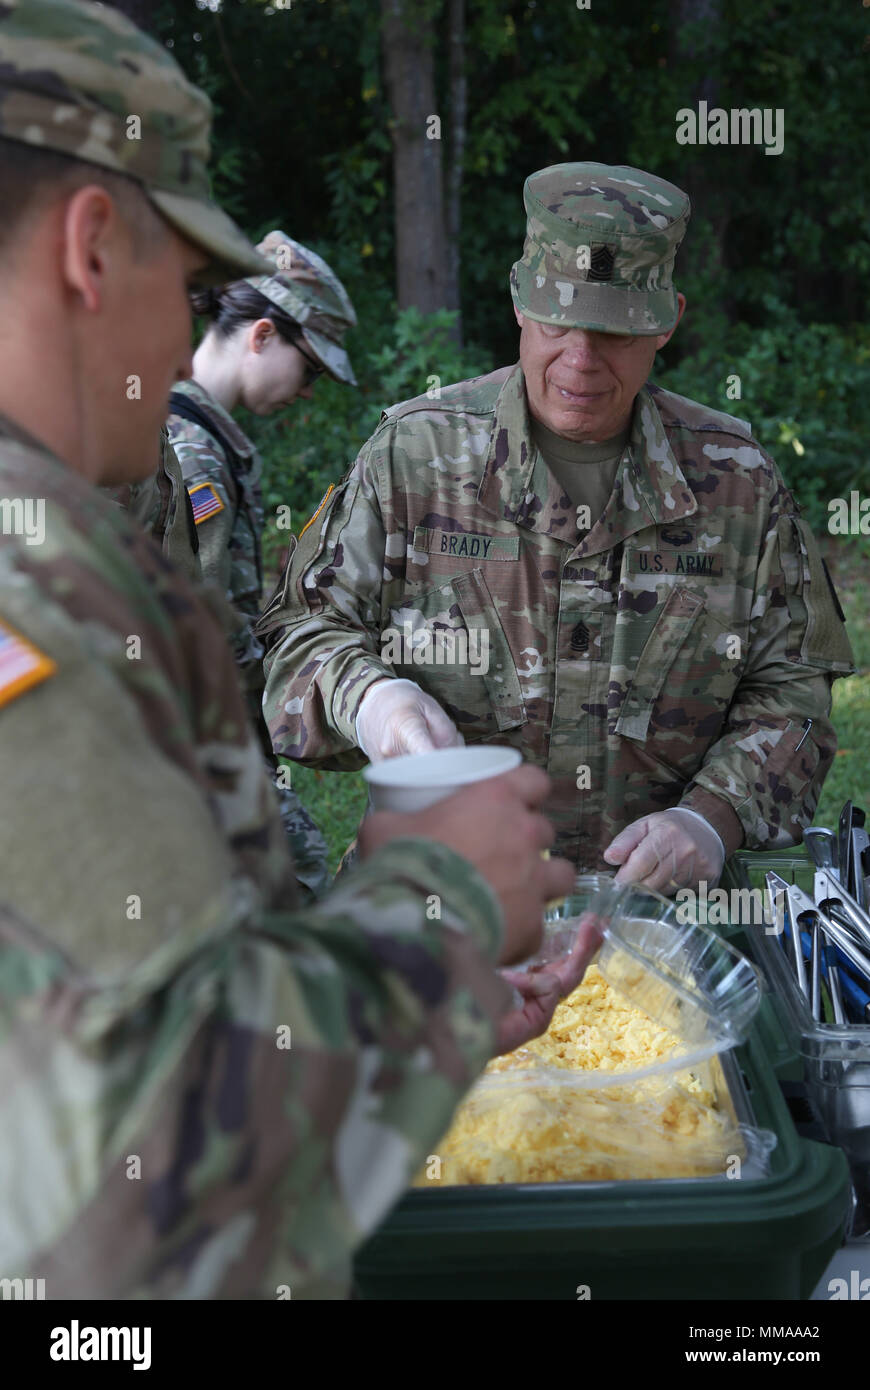 U.S. Army Command Sgt. Maj. Matthew Brady, assigned to Regional Health Command - Atlantic, serves hot breakfast to the competitors after the 2017 Best Medic Competition at Fort Bragg, N.C., Sept. 20, 2017. The competition tested the physical and mental toughness, as well as the technical competence, of each medic to identify the team moving forward to represent the region at the next level of the competition.  (U.S. Army photo by Pfc. Meleesa Gutierrez) Stock Photo